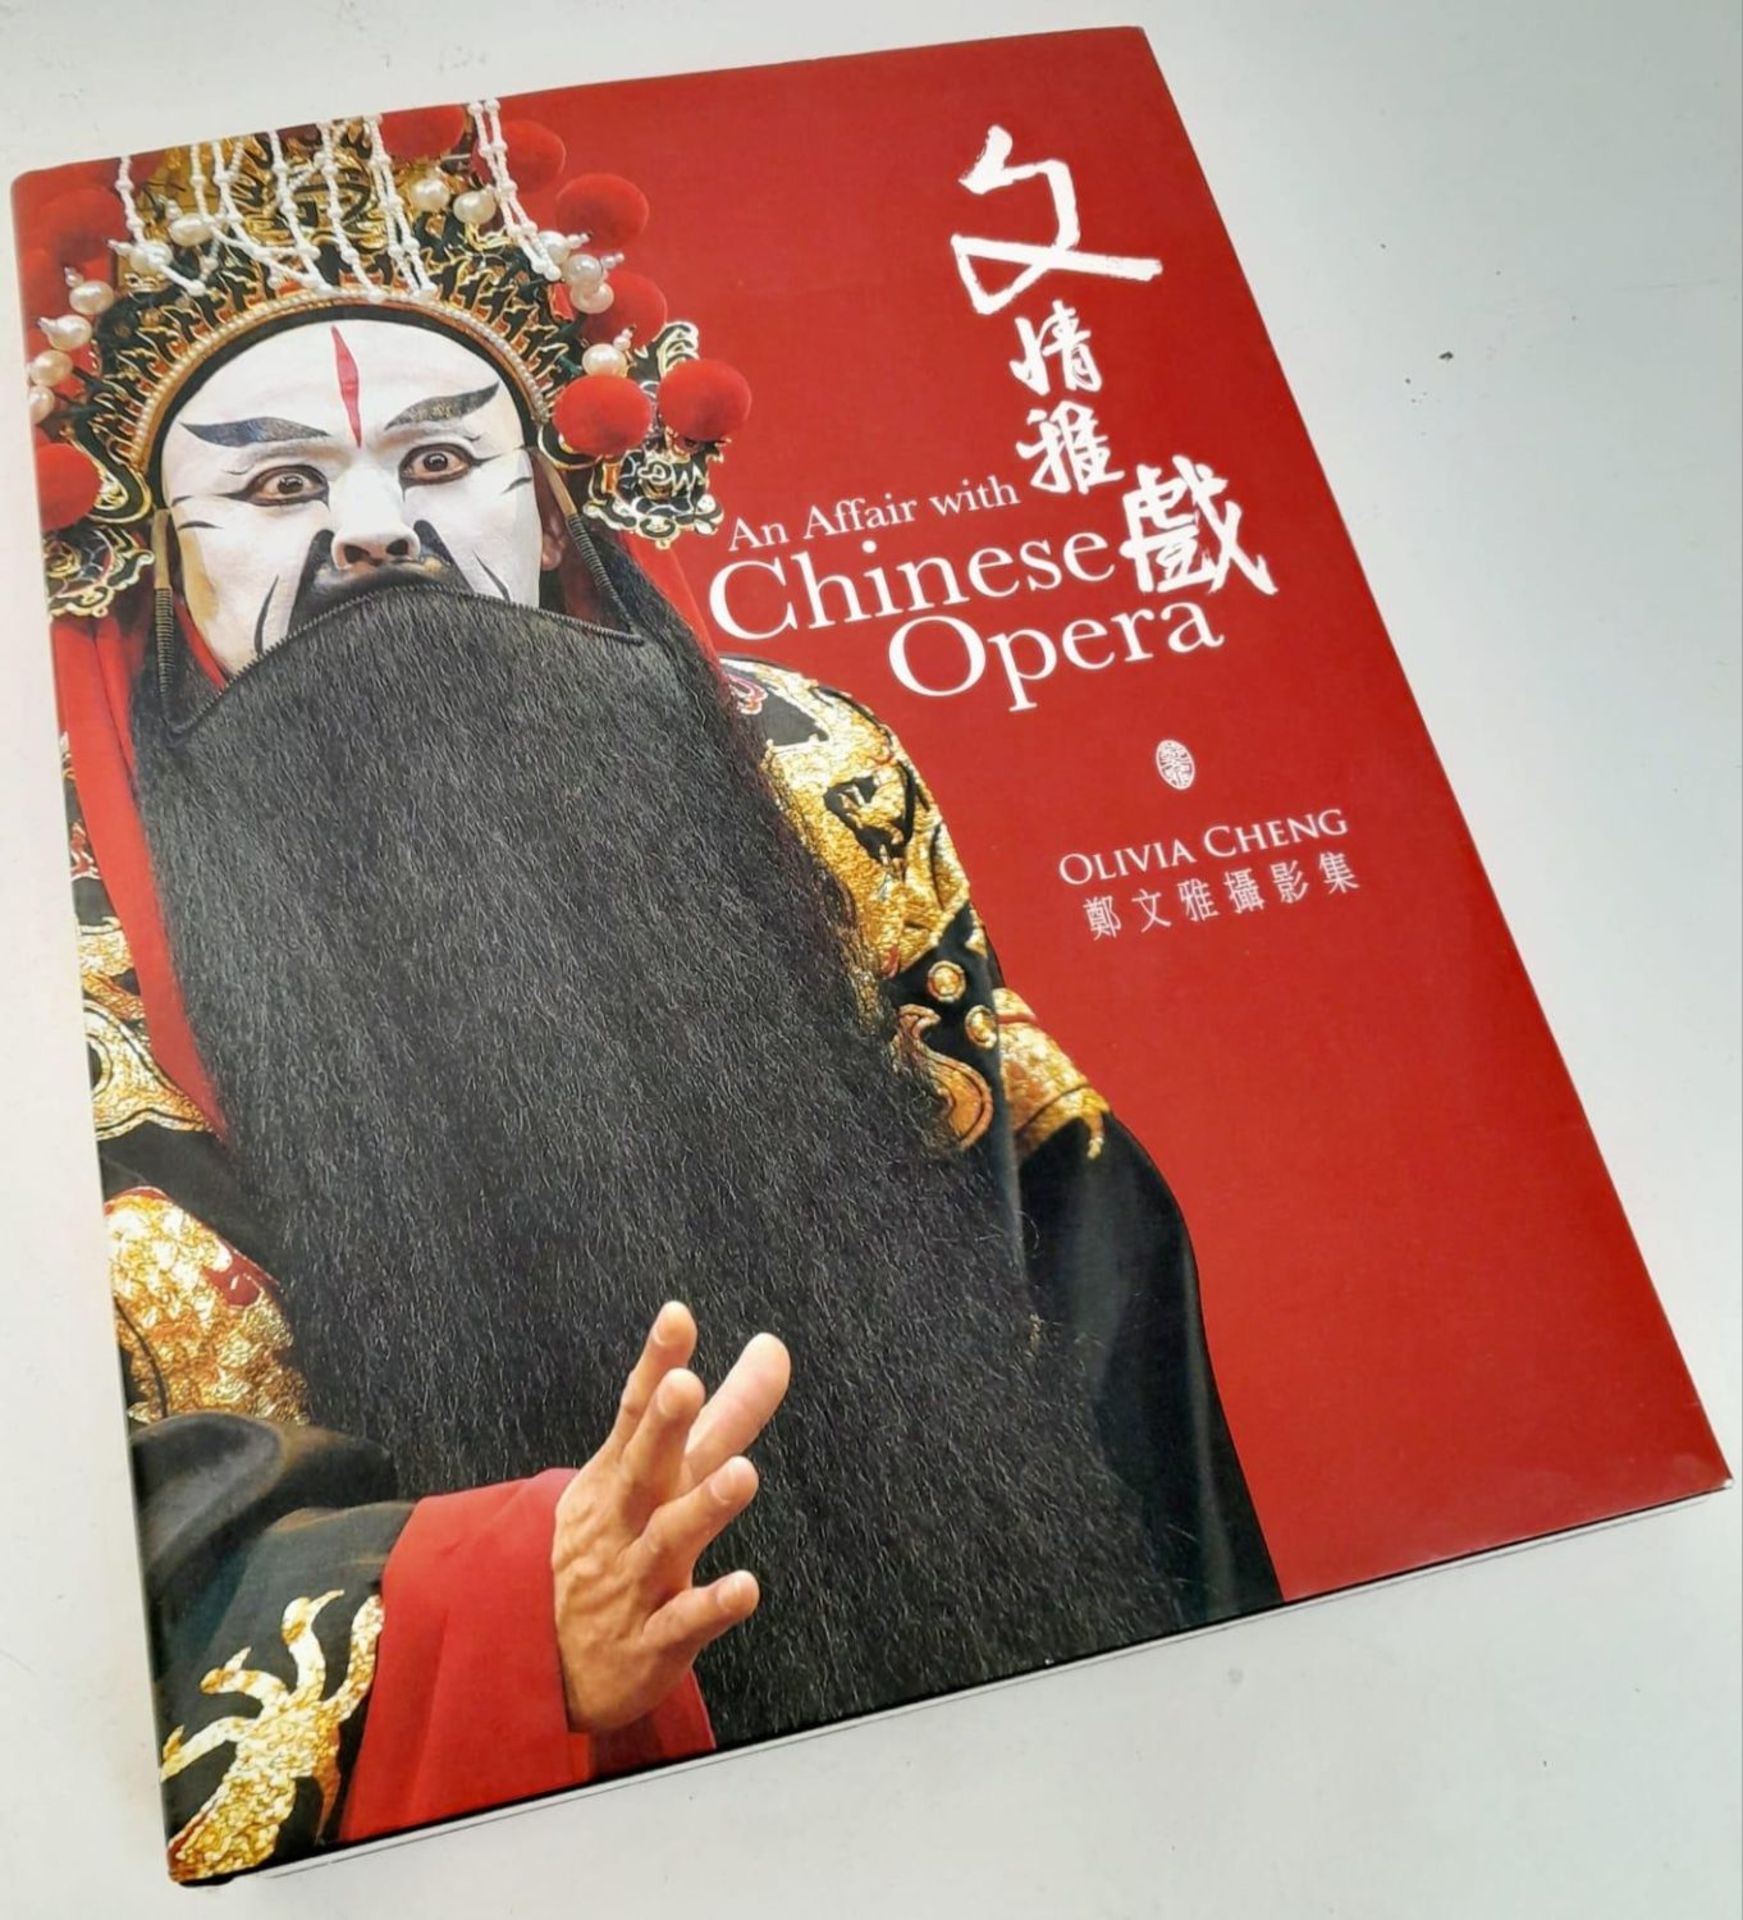 A spectacular edition of "An Affair with Chinese Opera" with Photographs and text by Olivia Cheng, - Bild 3 aus 8